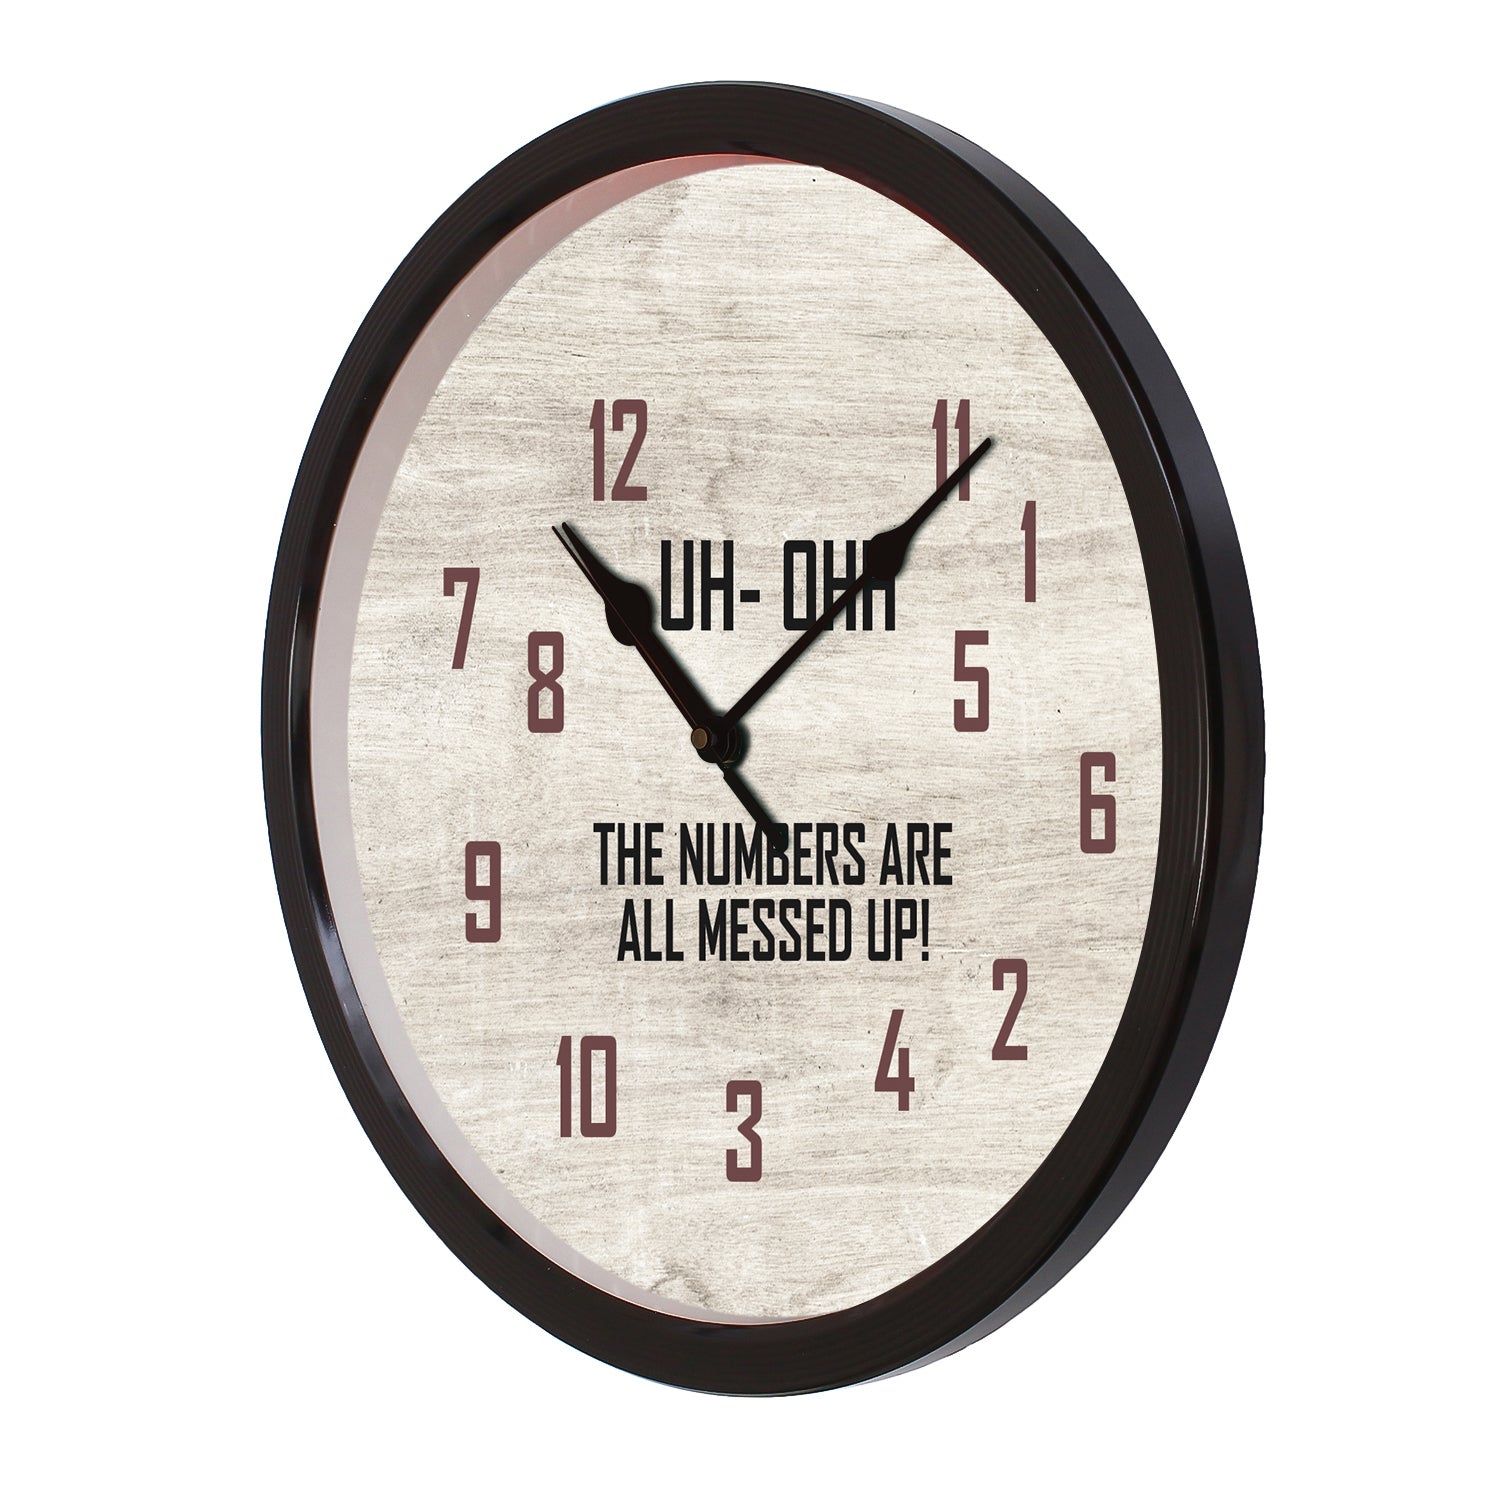 "The Numbers Are Messed Up" Designer Round Analog Black Wall Clock 4